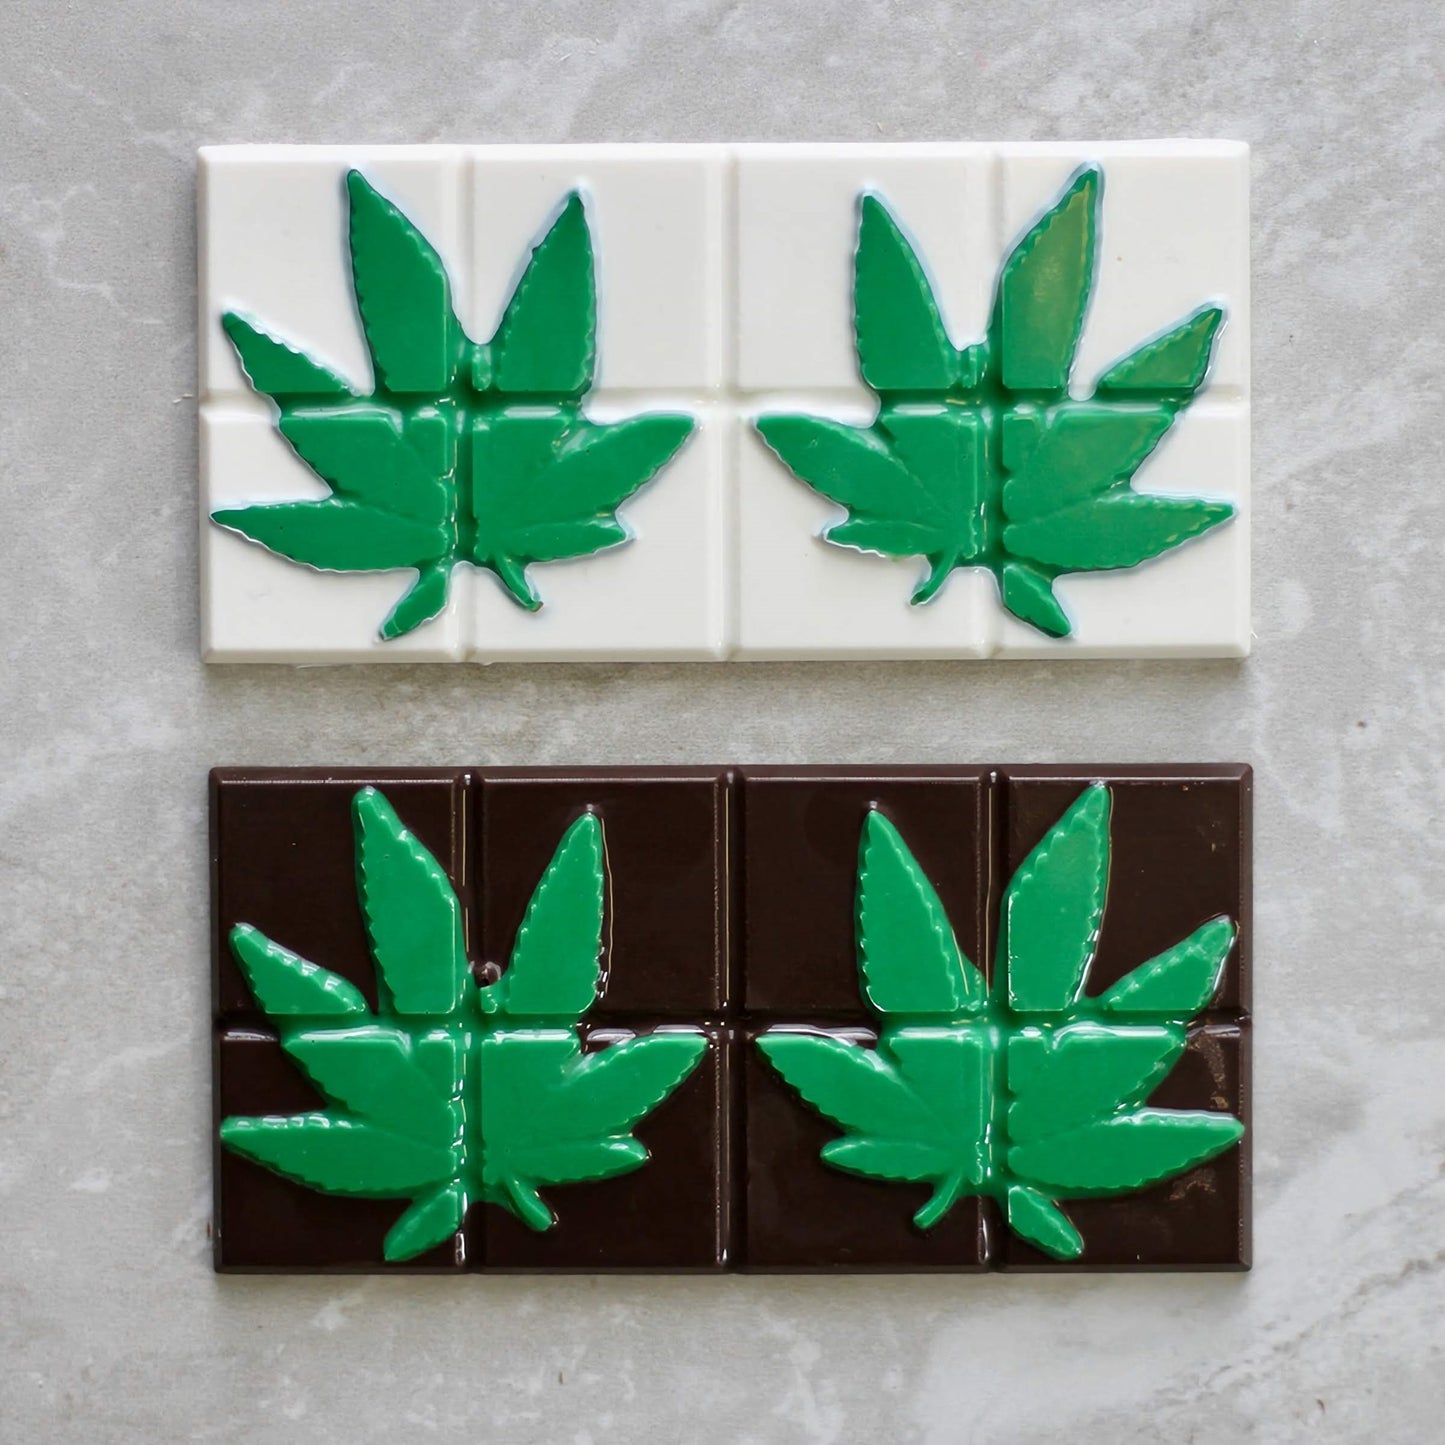 a chocolate mold with segmented squares, each featuring a raised, detailed imprint of a marijuana leaf. The top row of squares is white chocolate with green leaves, and the bottom row is dark chocolate with green leaves, all set against a gray stone background.